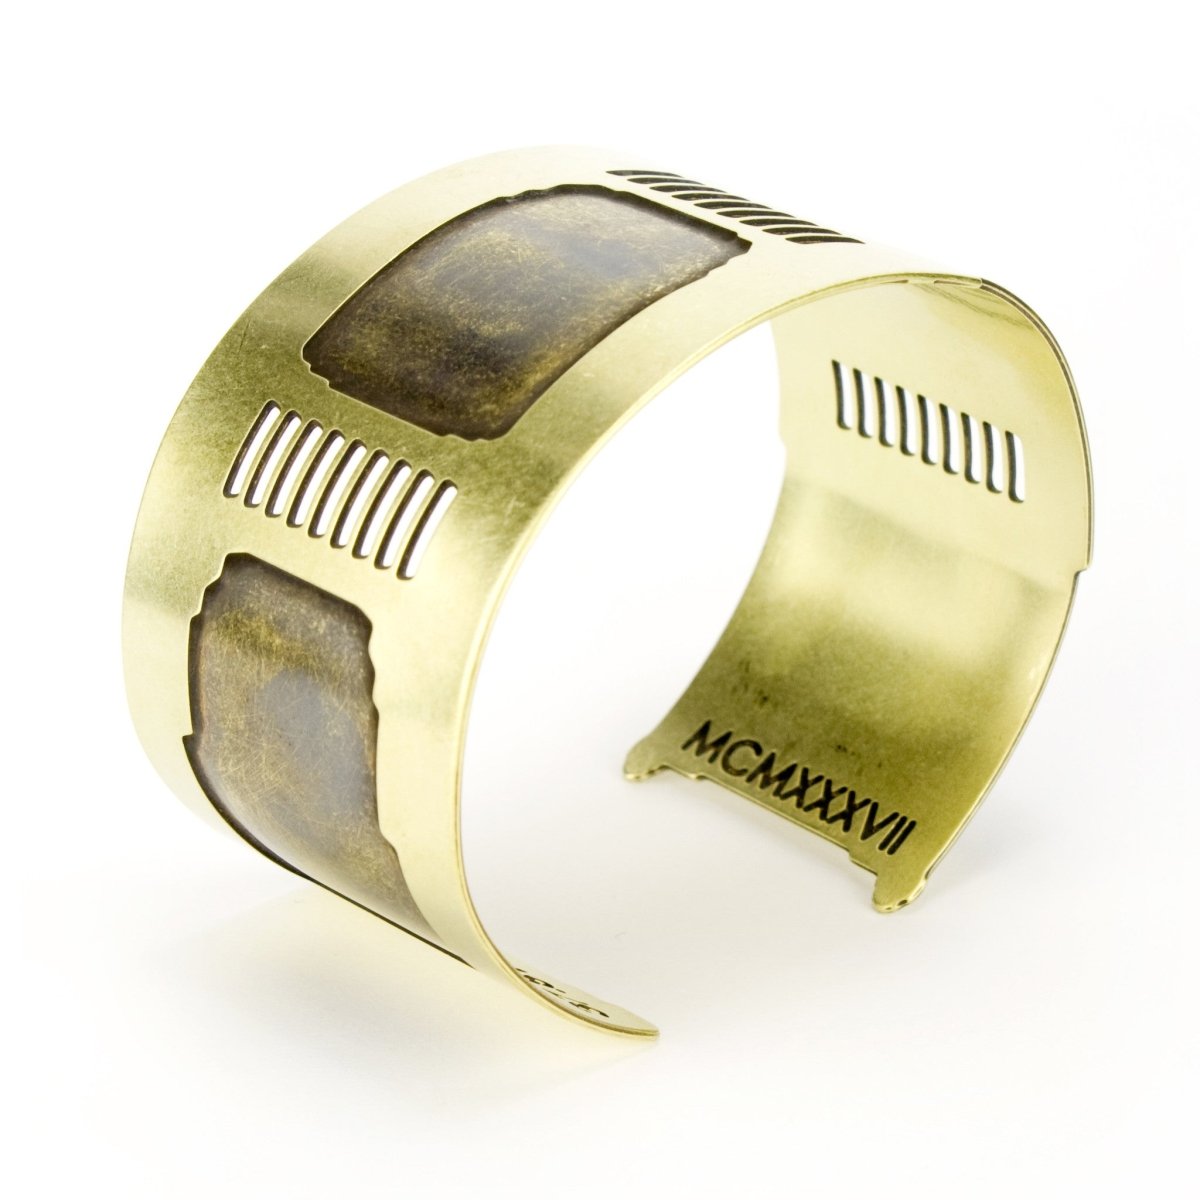 Side view of the Golden Gate cuff bracelet by betsy and iya.